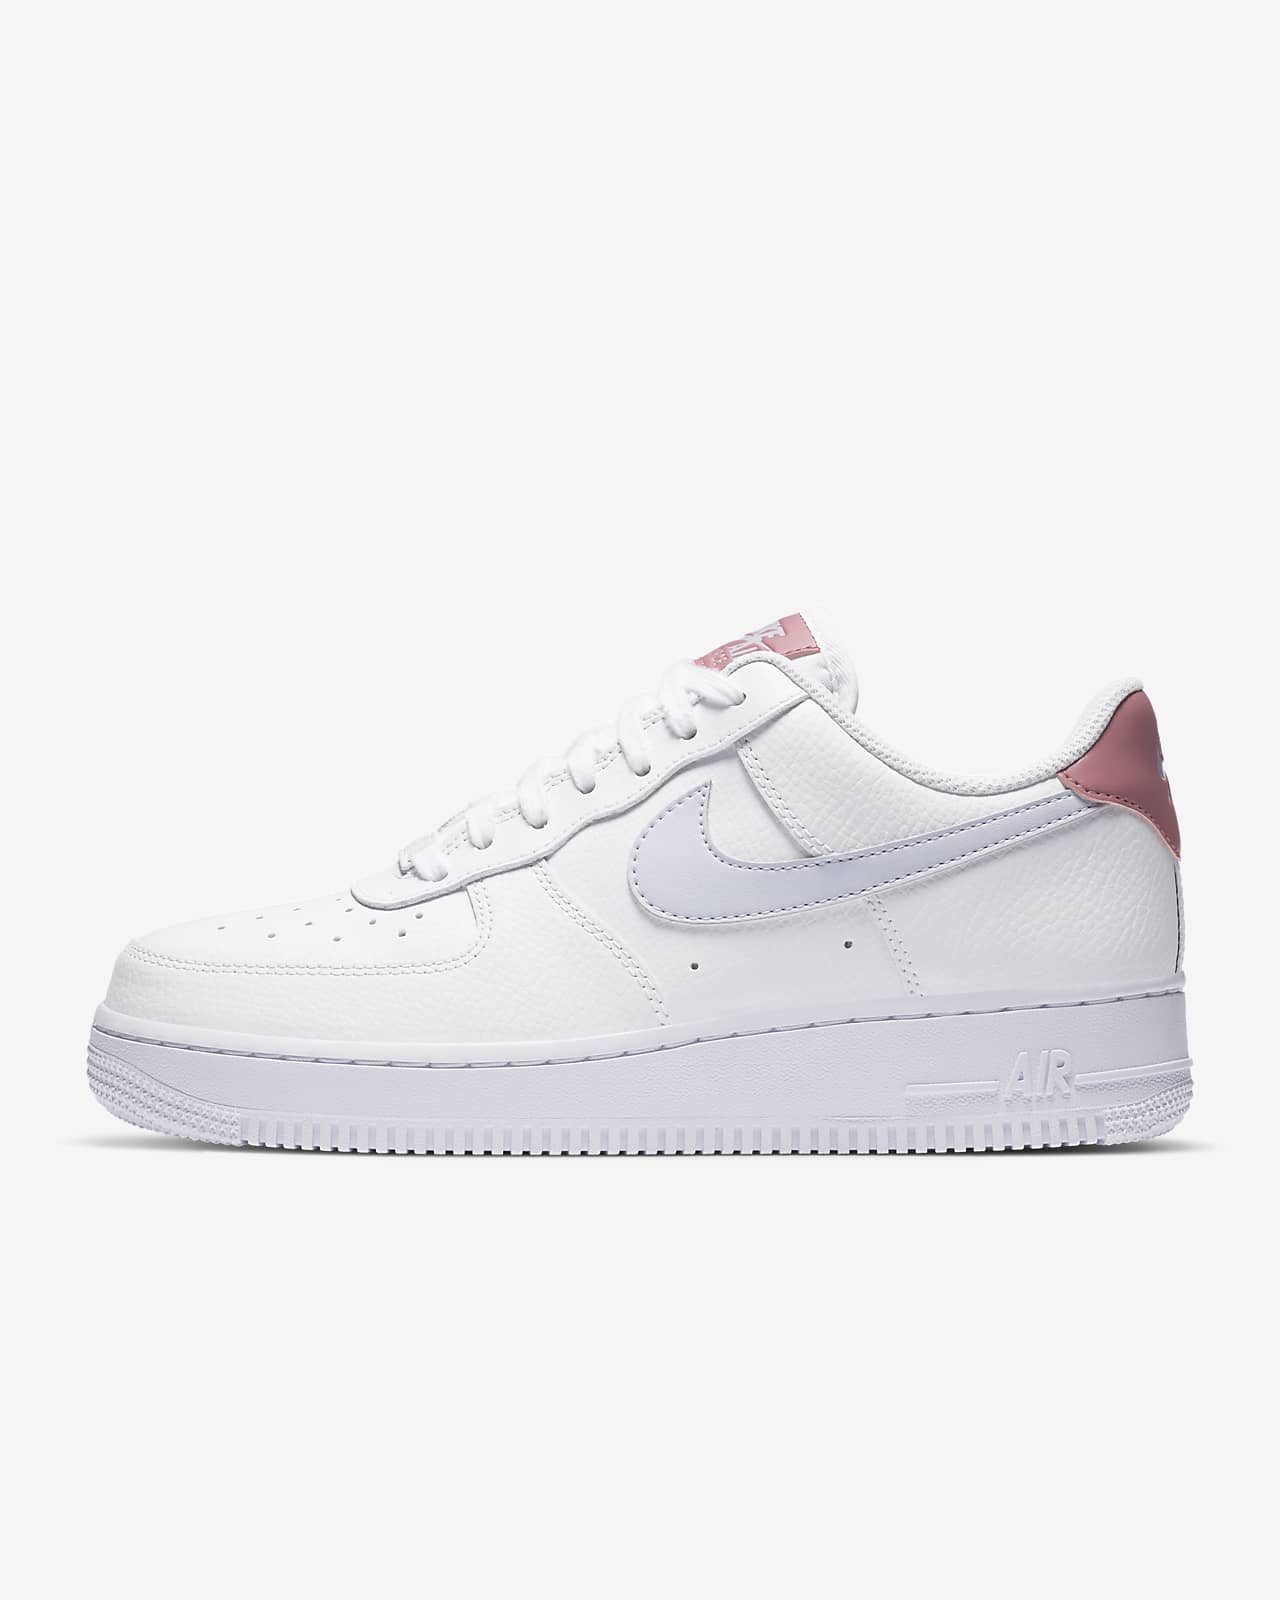 nike air force one size 1